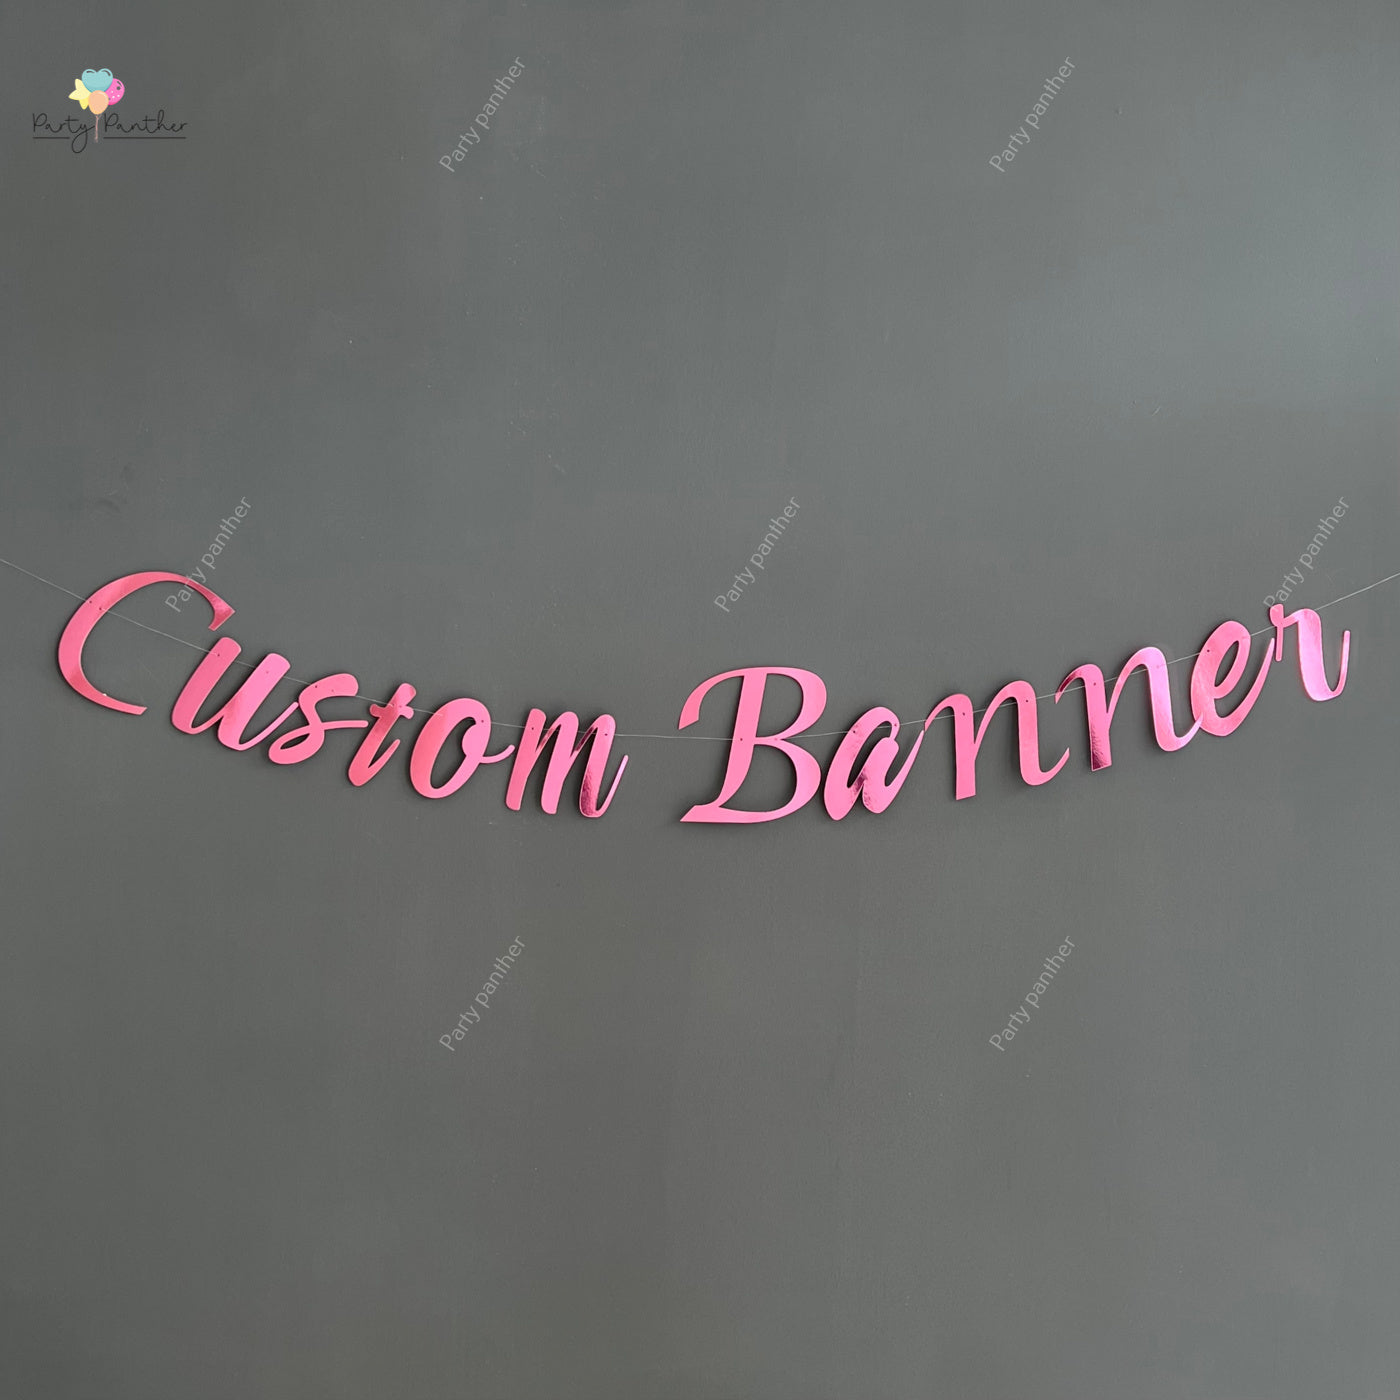 Customised Cursive Metallic Pink Banner - Personalized Handmade party decorations for all occasions